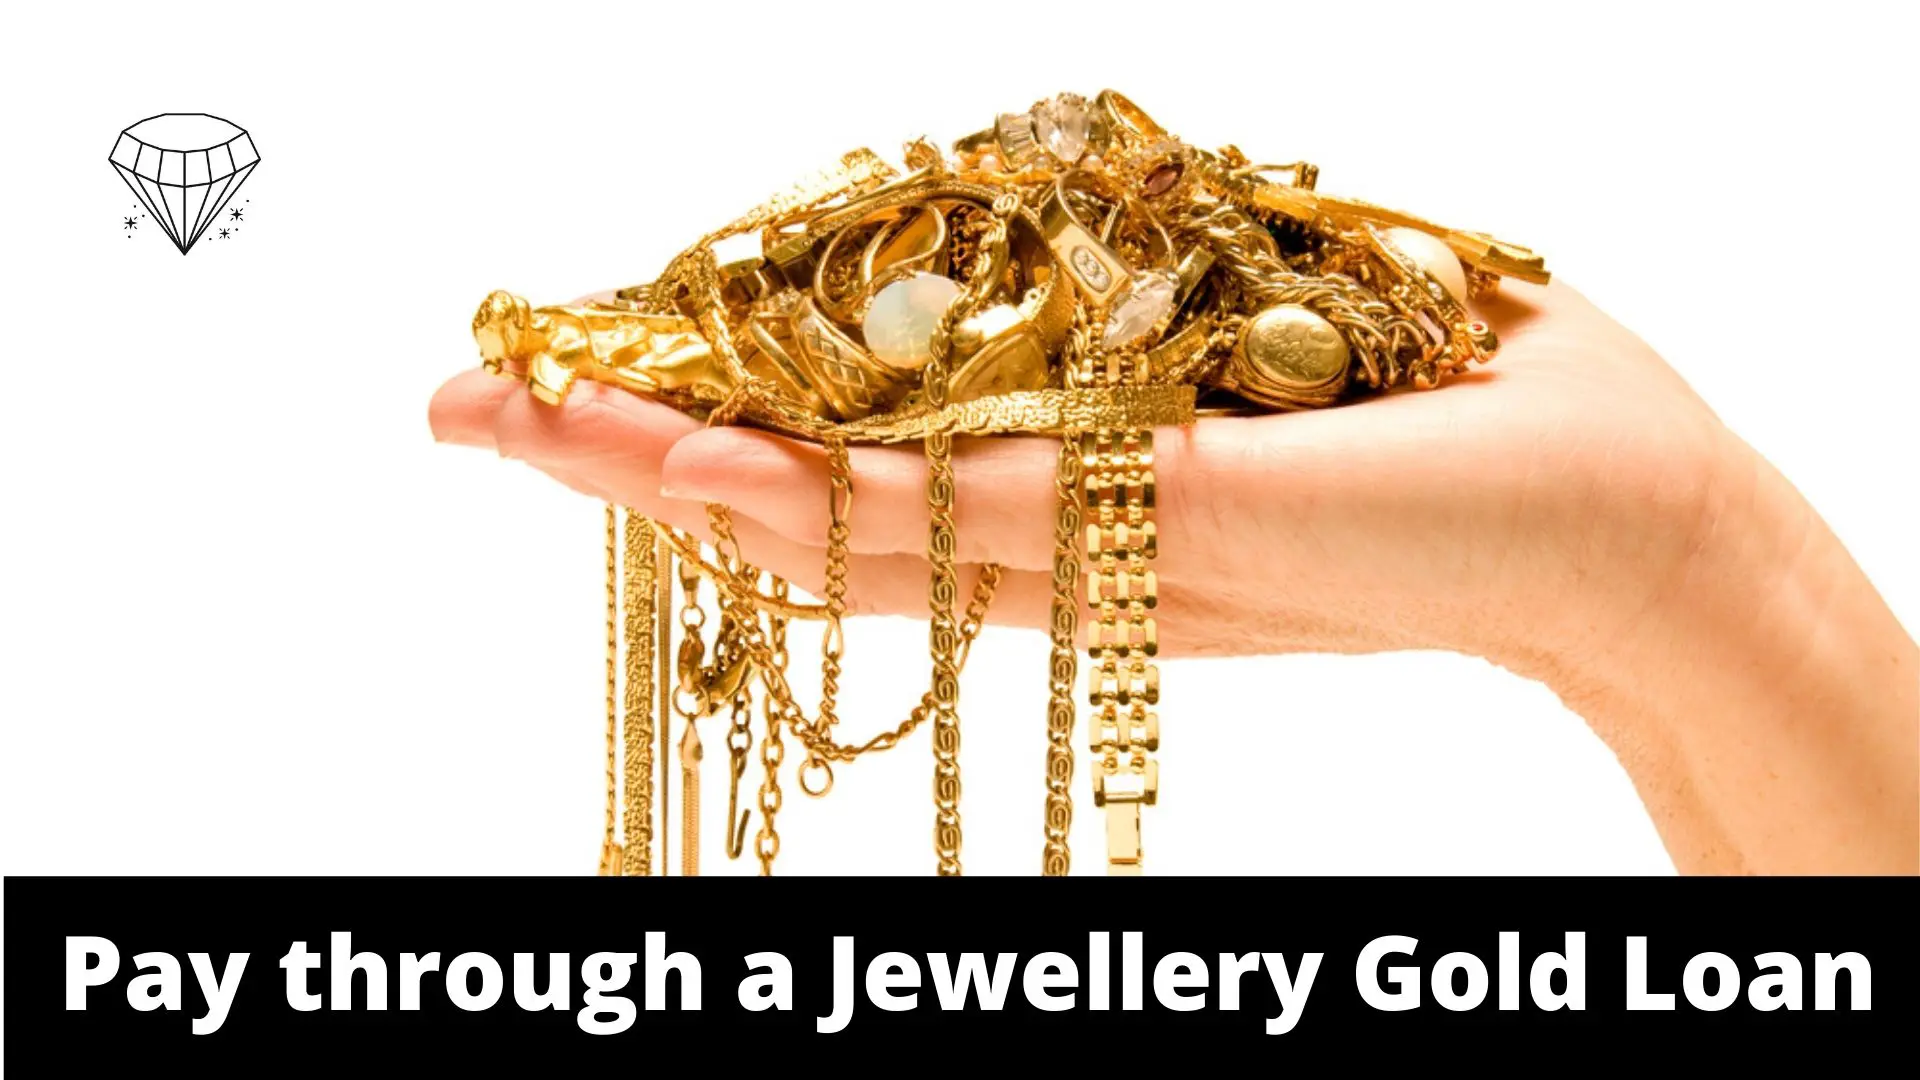 Pay through a Jewellery Gold Loan